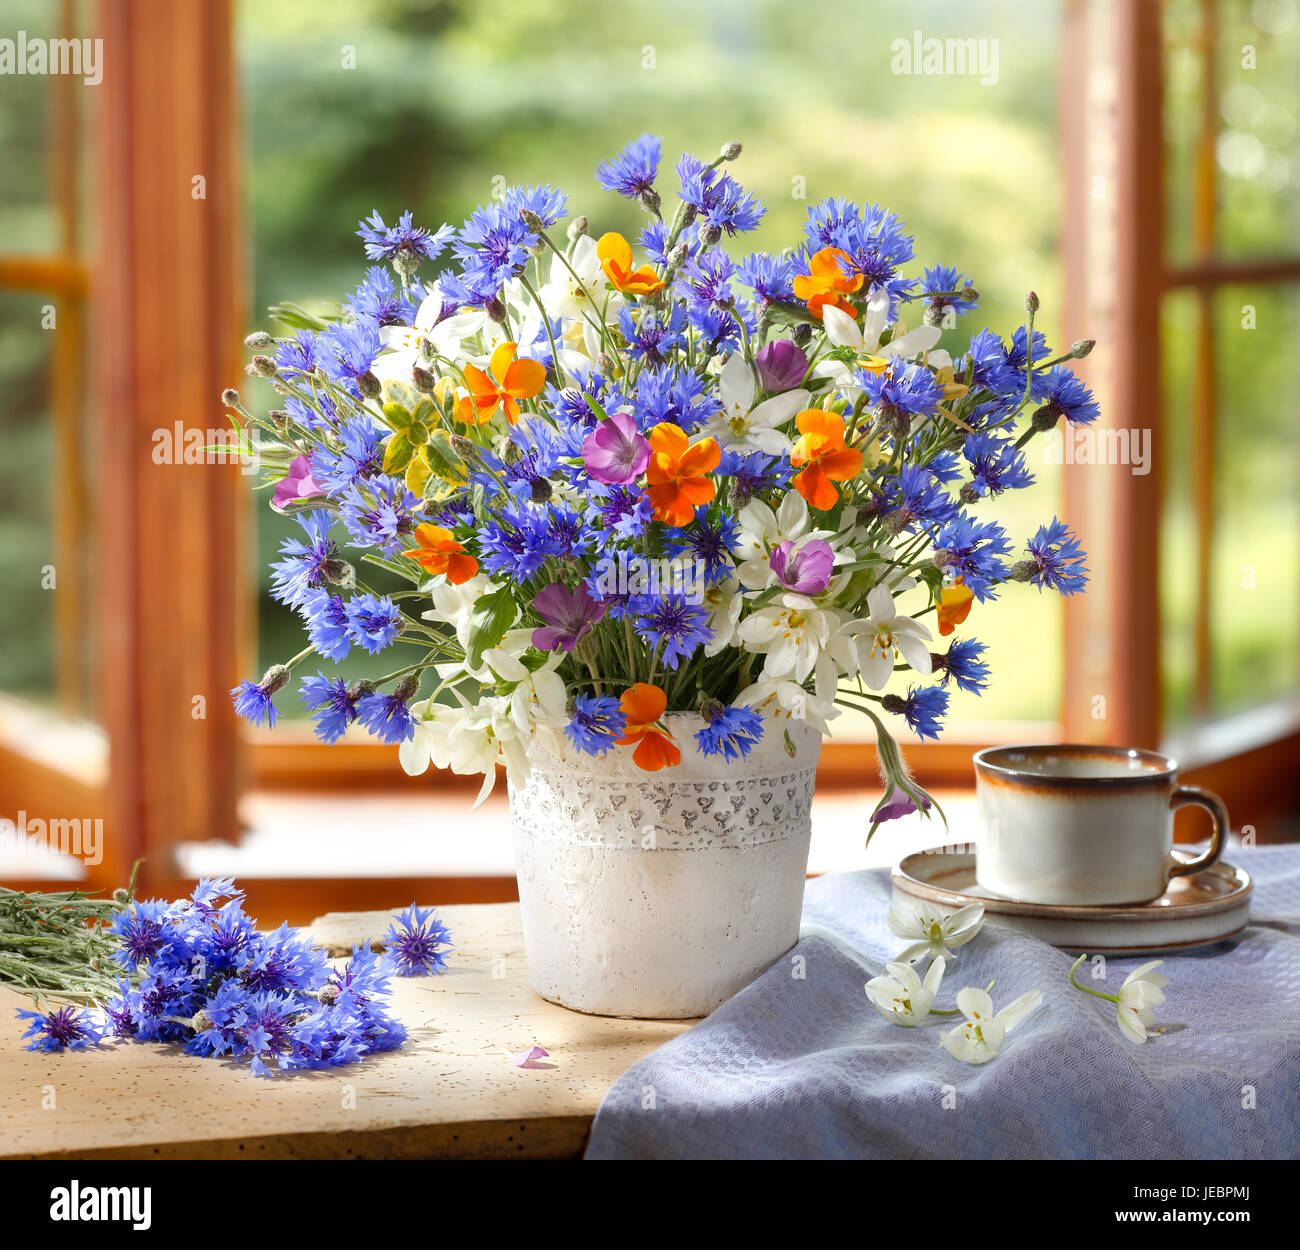 Bouquet of flowers with cornflowers. Stock Photo